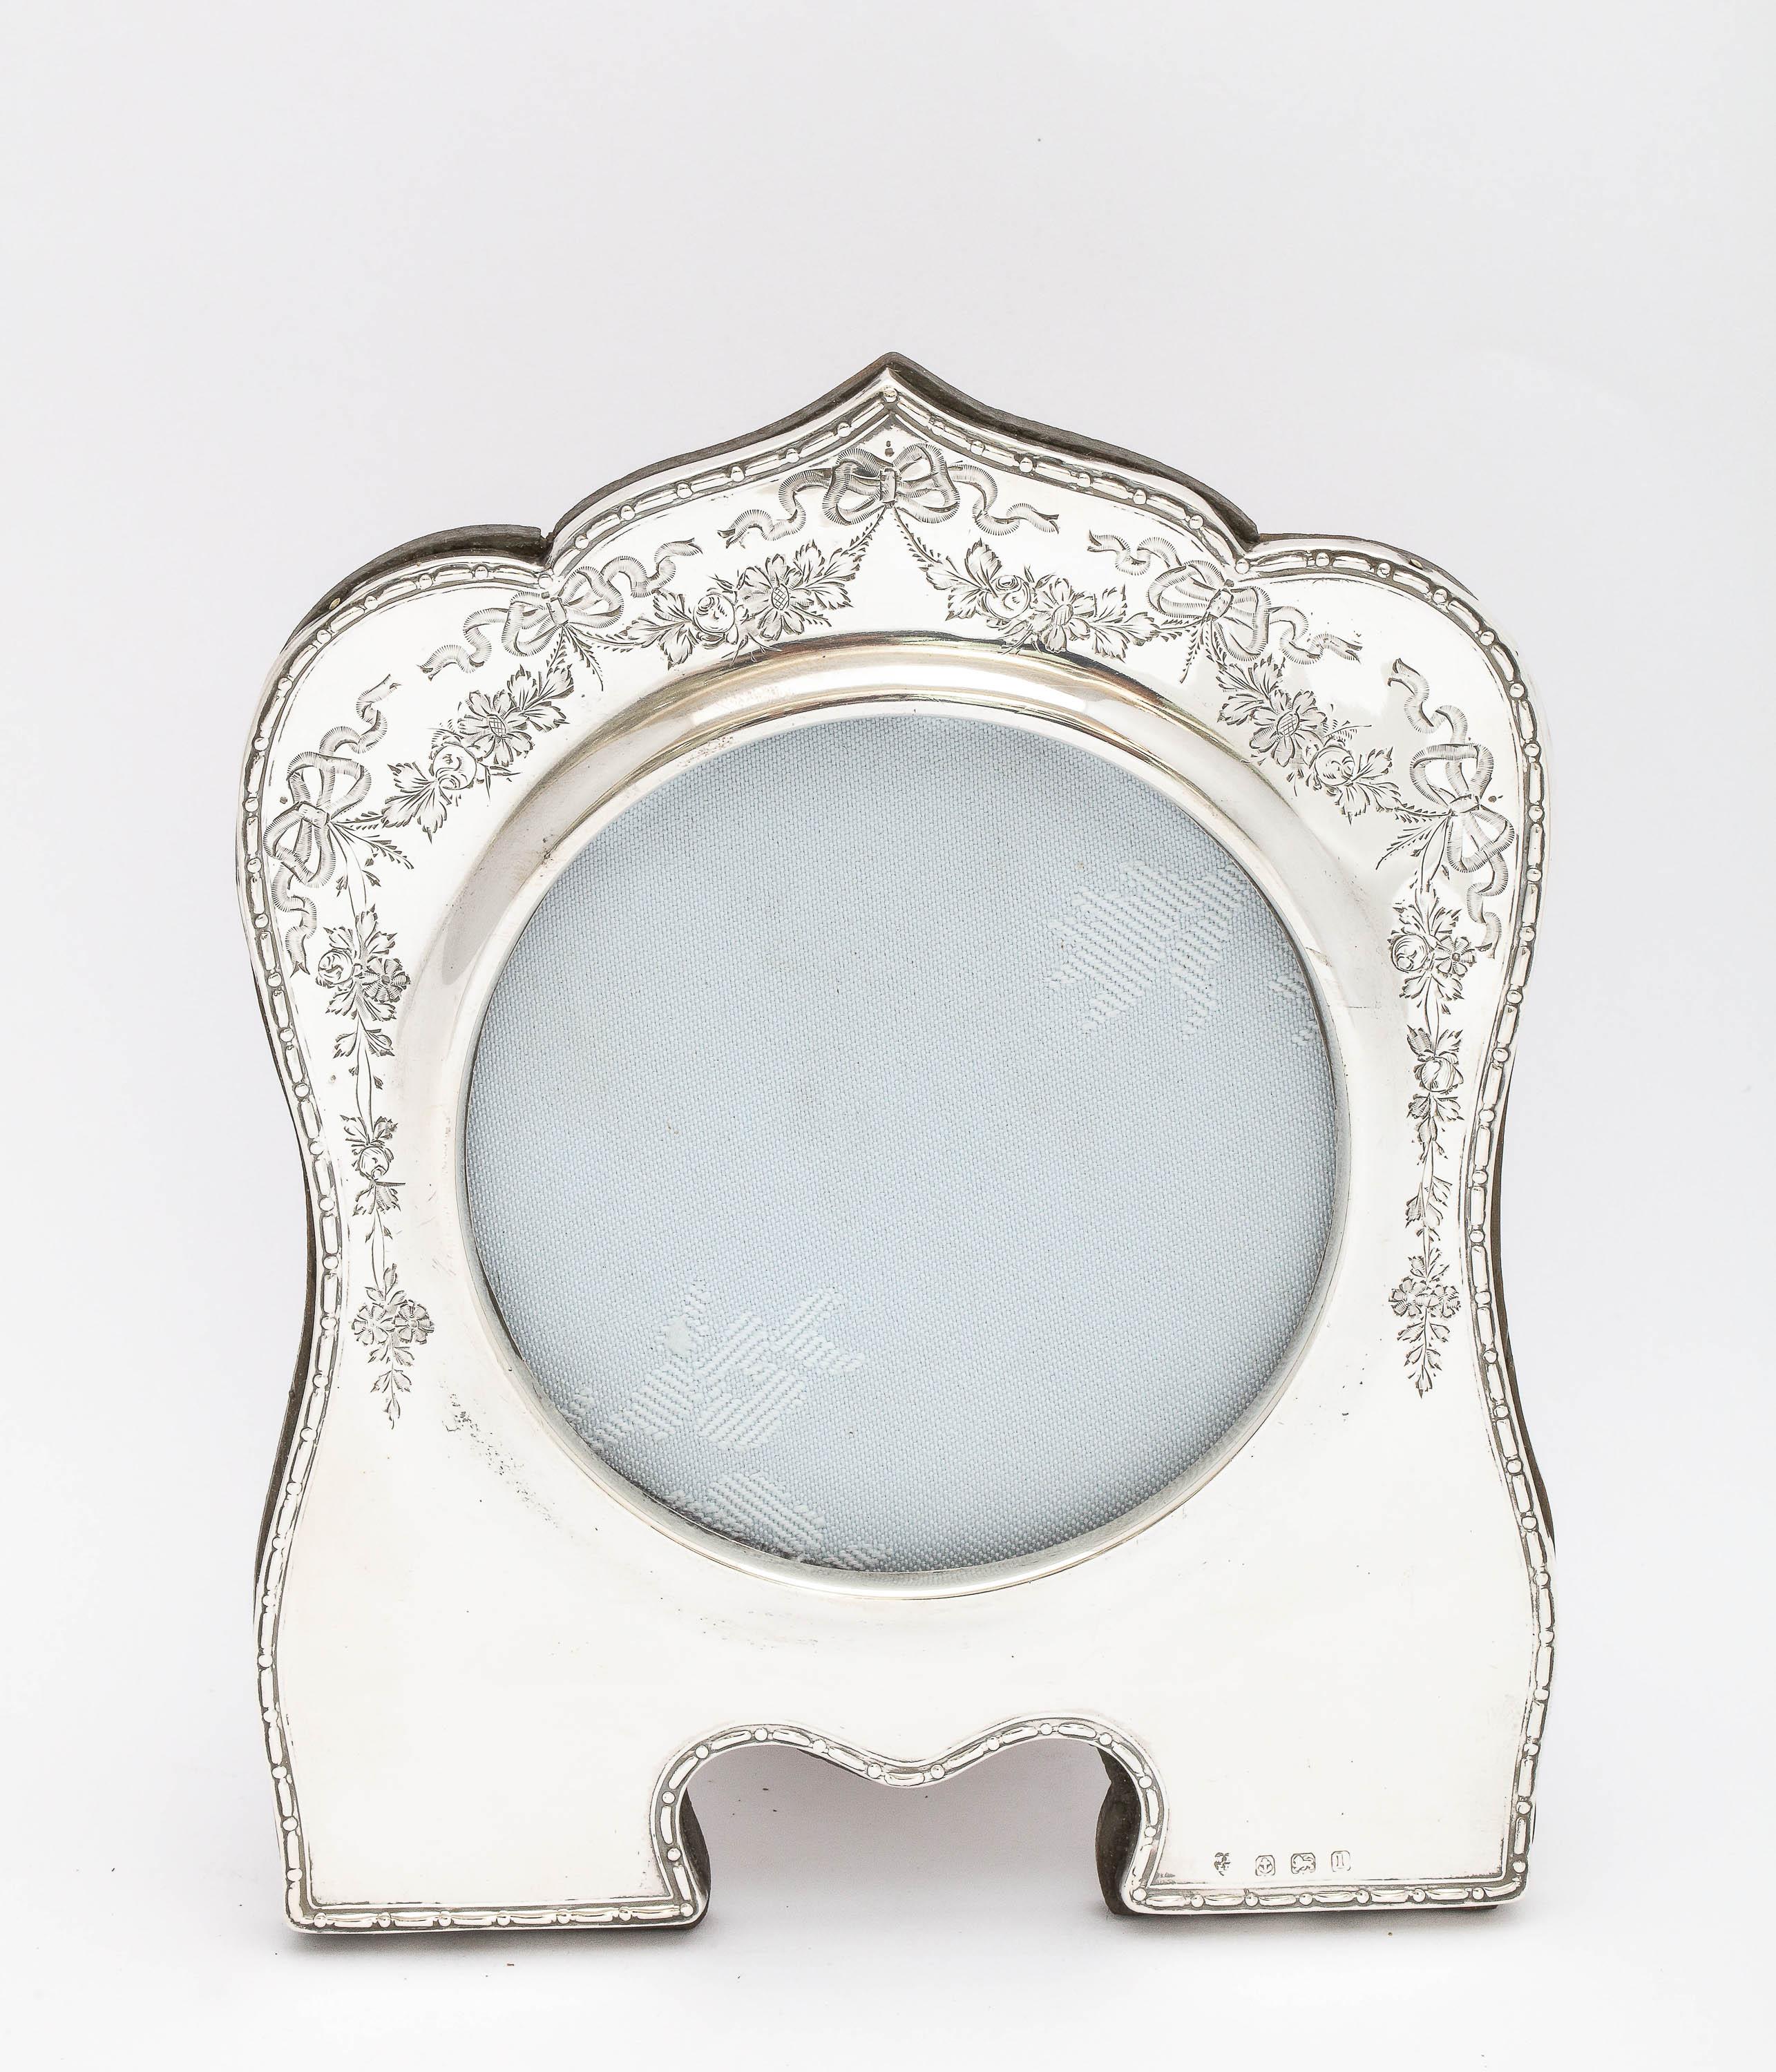 Unusual, Edwardian, sterling silver, wood-backed picture frame, Birmingham, England, year - hallmarked for 1910, Williams, Ltd. - makers. Decorated with lovely, etched work - garlands and bows surround the upper portion of the frame. Frame measures